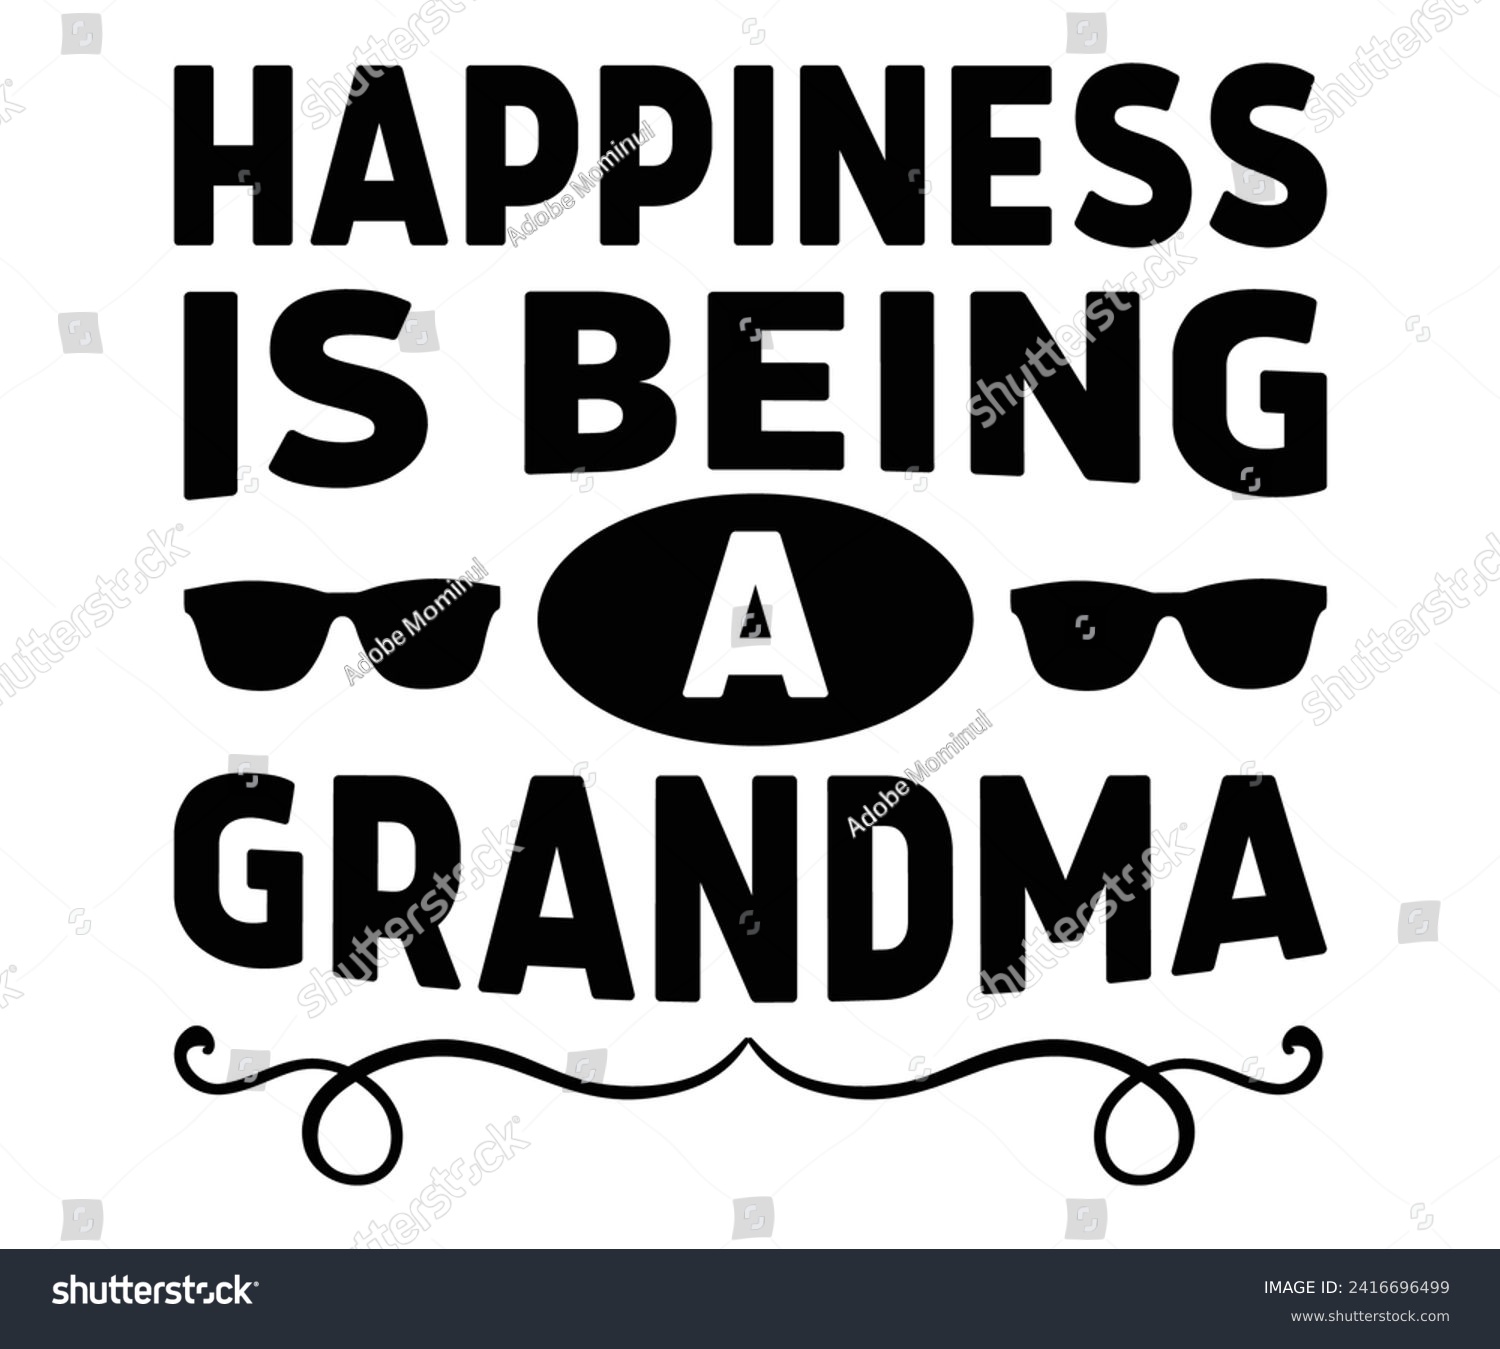 SVG of Happiness is Being a Grandma Svg,Father's Day Svg,Papa svg,Grandpa Svg,Father's Day Saying Qoutes,Dad Svg,Funny Father, Gift For Dad Svg,Daddy Svg,Family Svg,T shirt Design,Svg Cut File,Typography svg